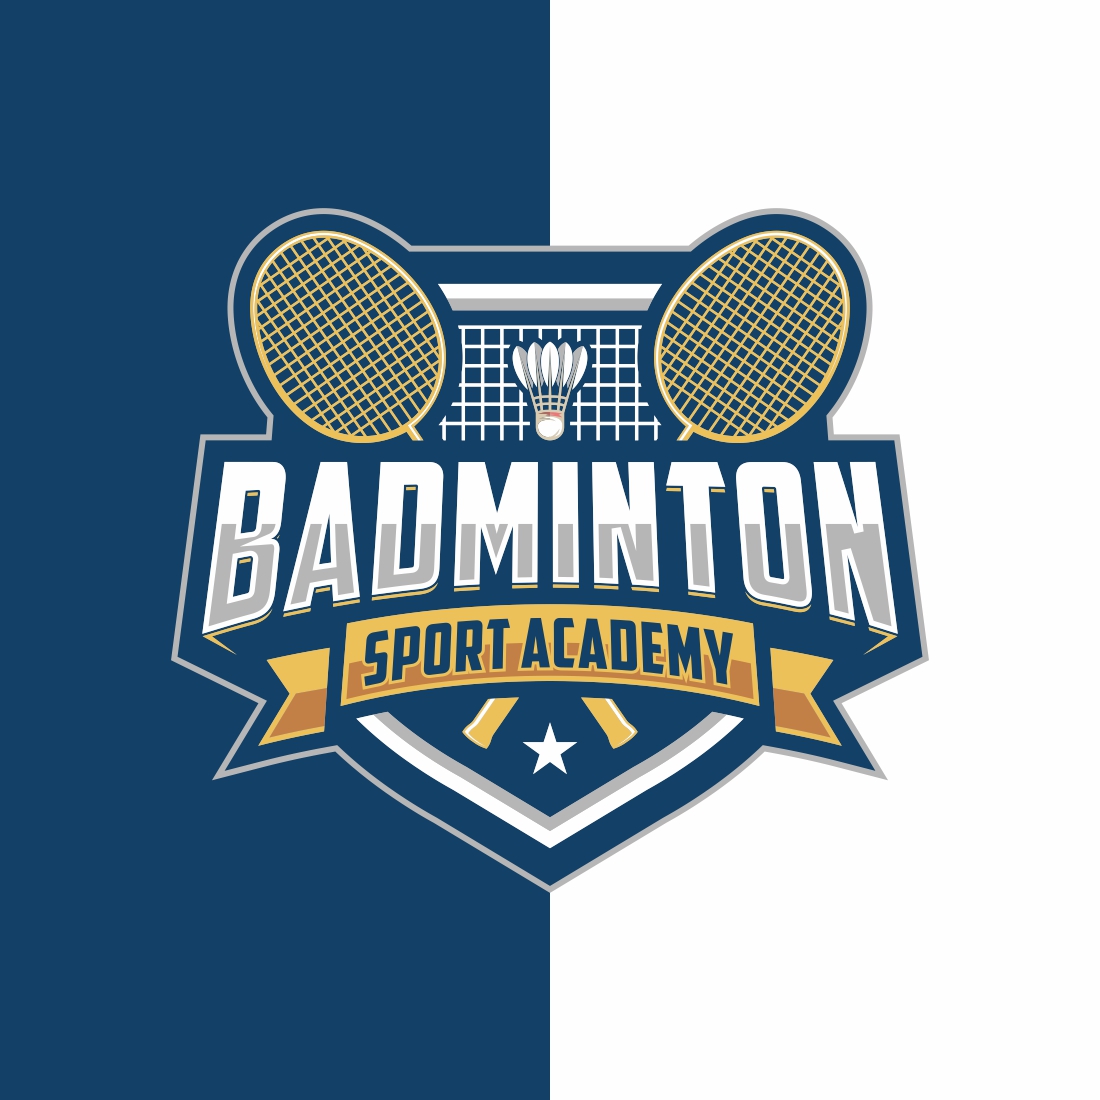 Badminton badge logo in modern minimalist style – Only $7 preview image.